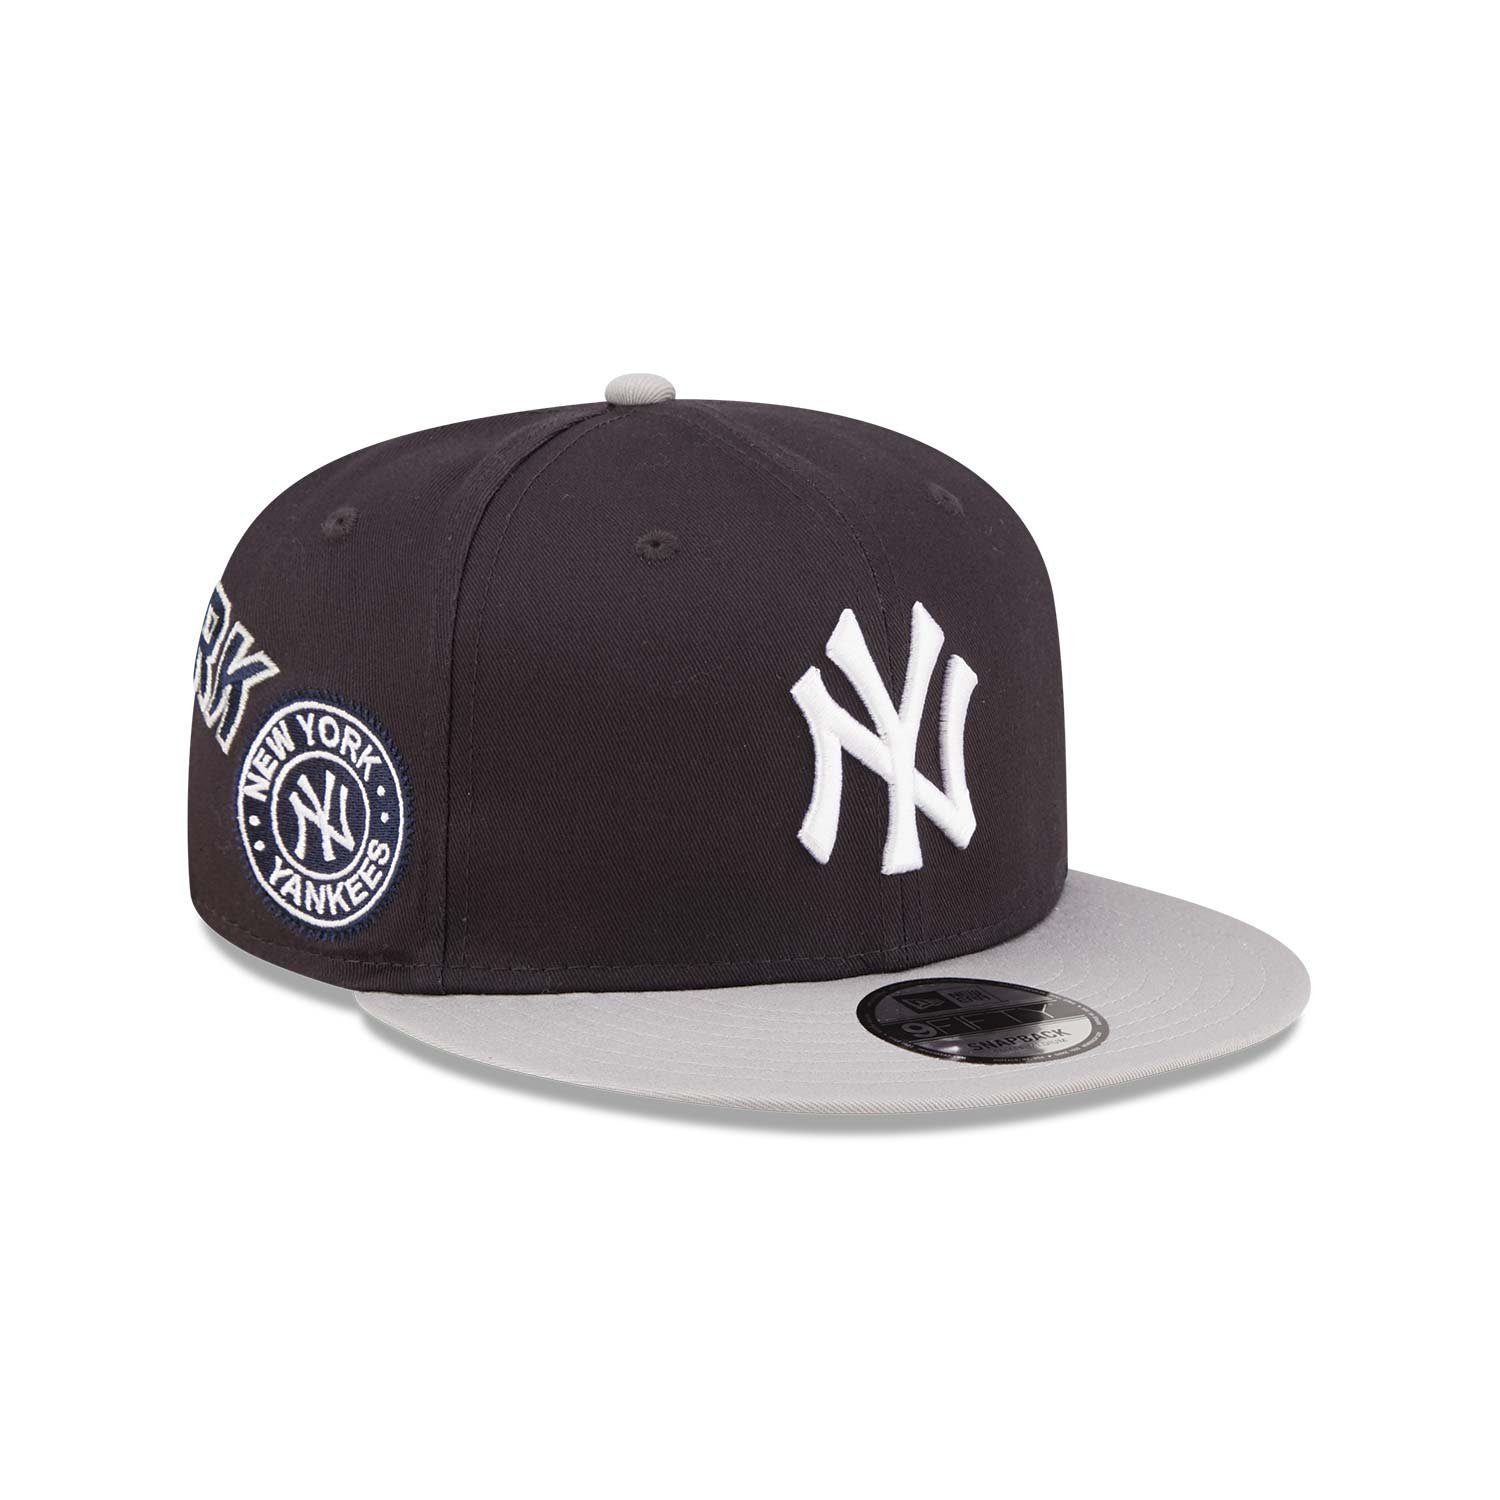 New Era Baseball 9FIFTY Over All York Cap New Patches Yankees